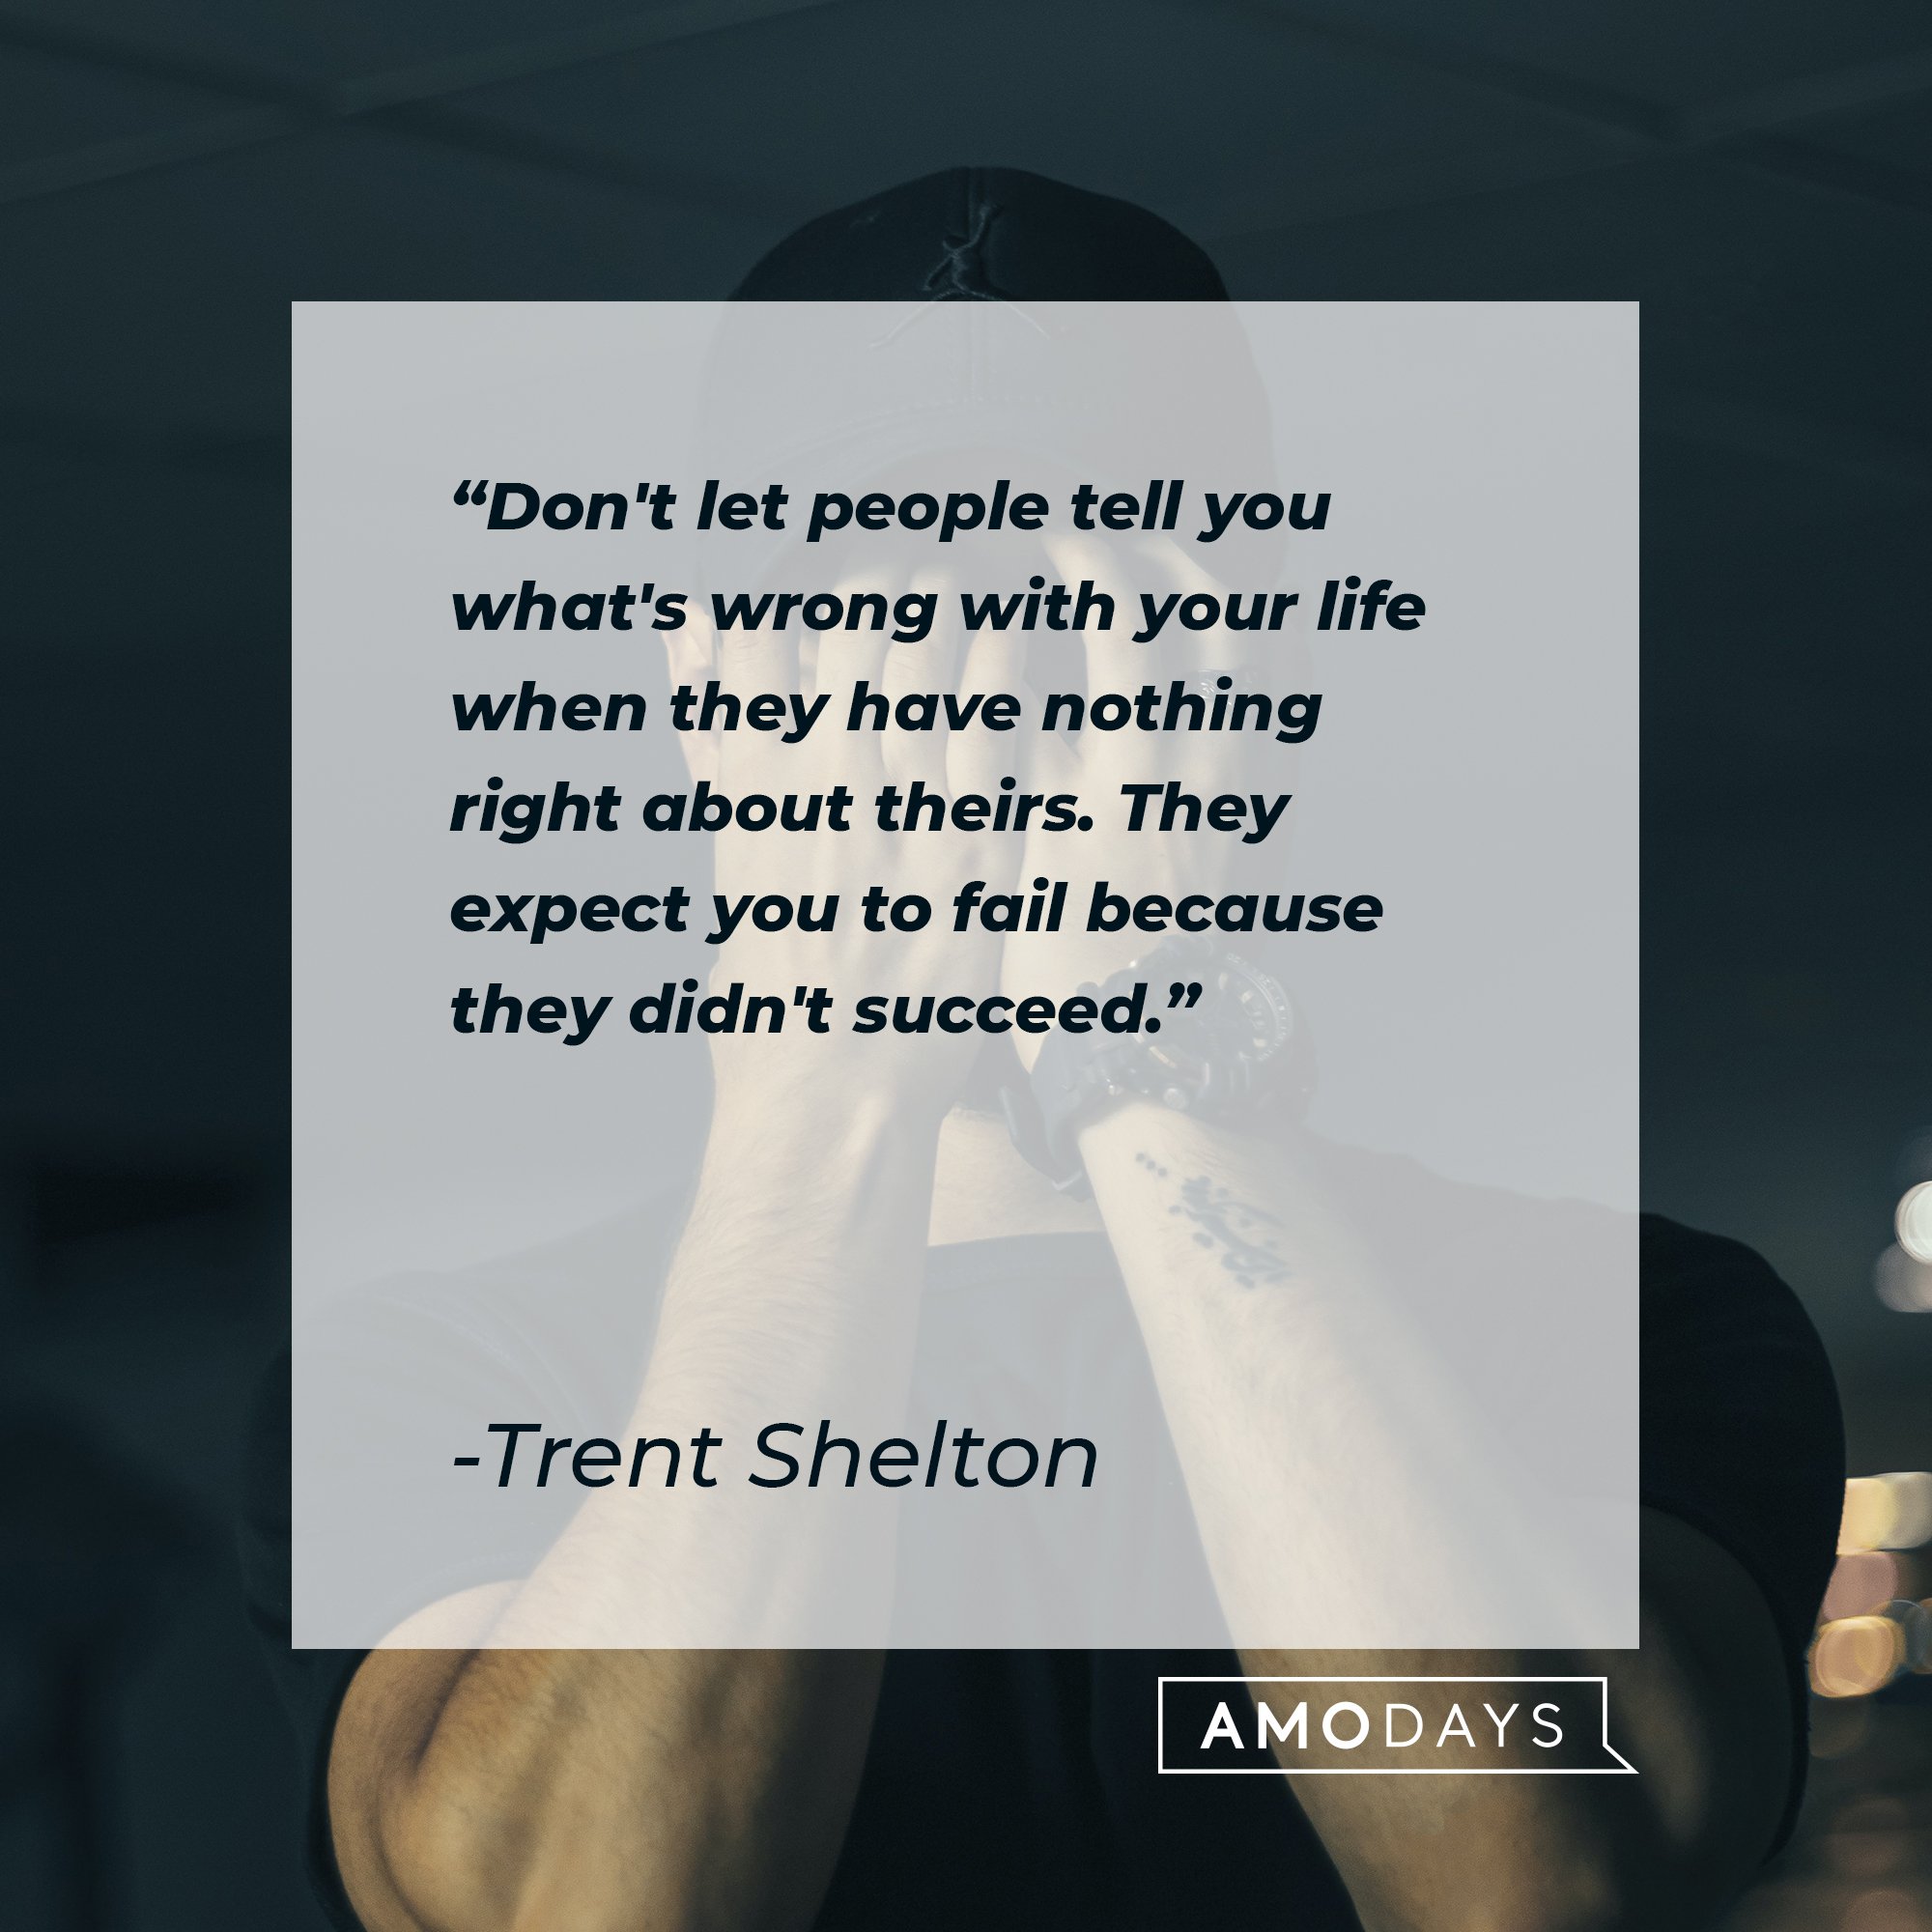 Trent Shelton's quote: "Don't let people tell you what's wrong with your life when they have nothing right about theirs. They expect you to fail because they didn't succeed." | Image: AmoDays